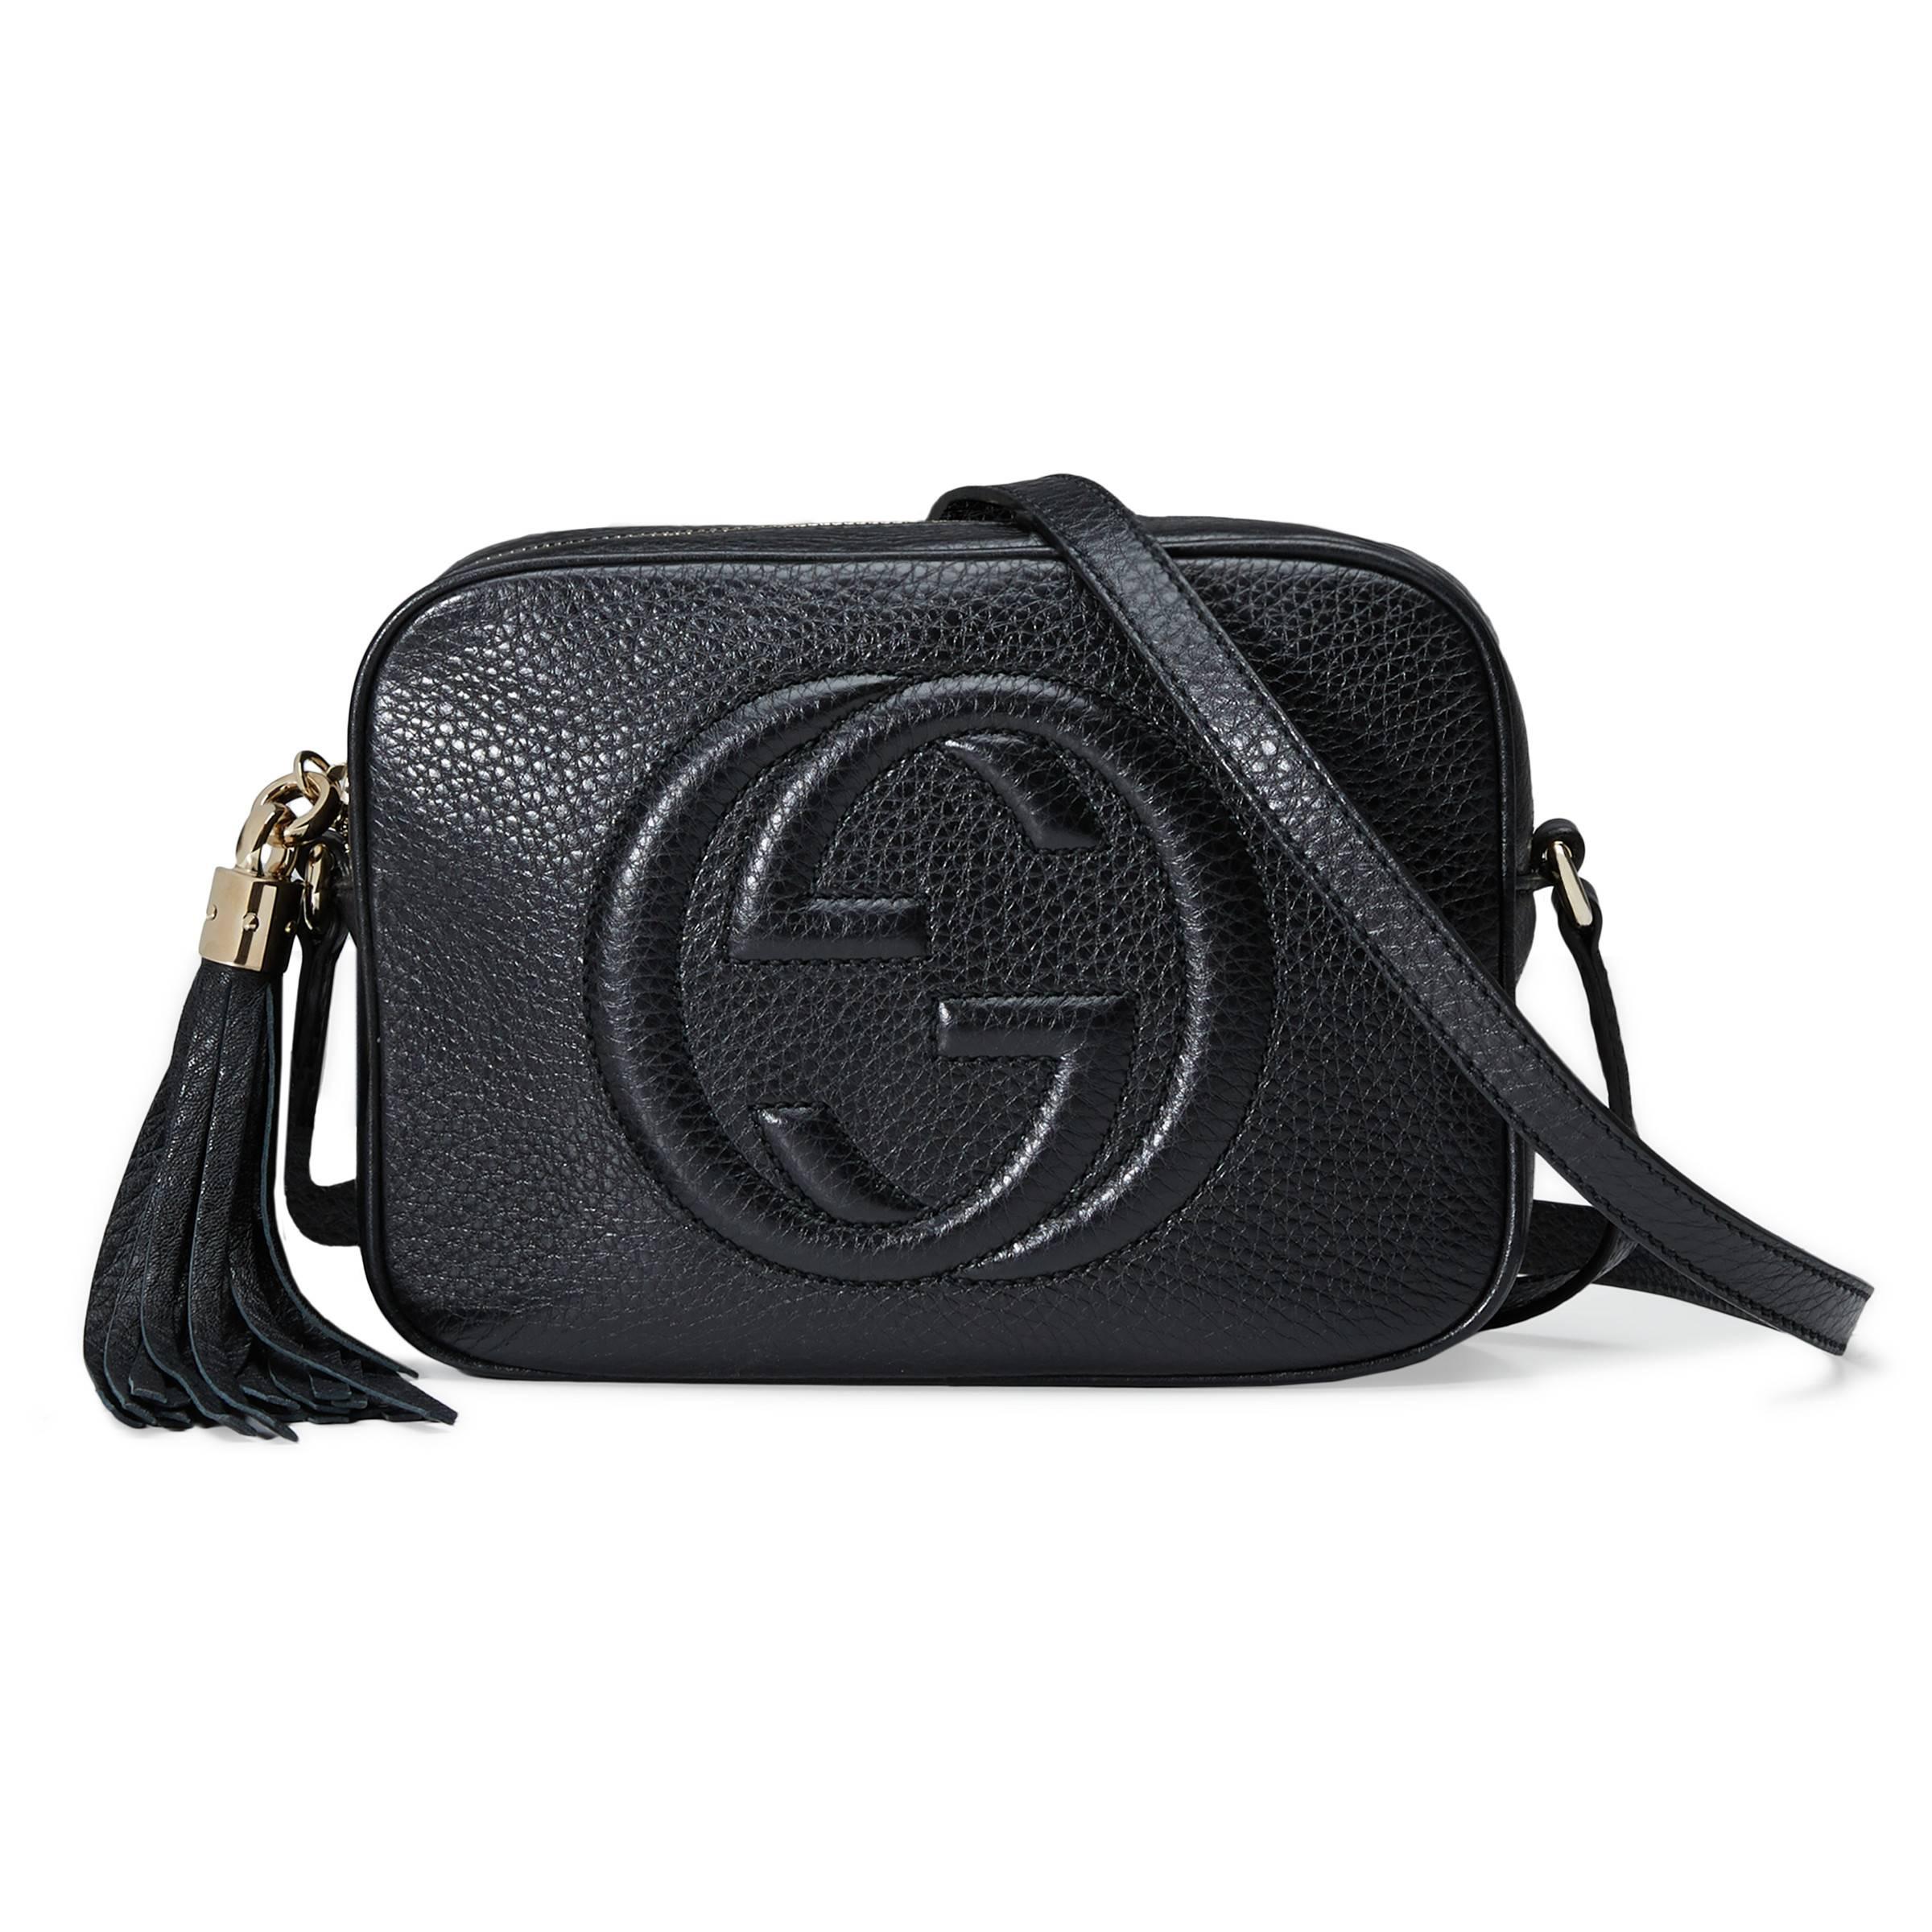 Gucci Soho Small Leather Disco Bag in Black - Lyst